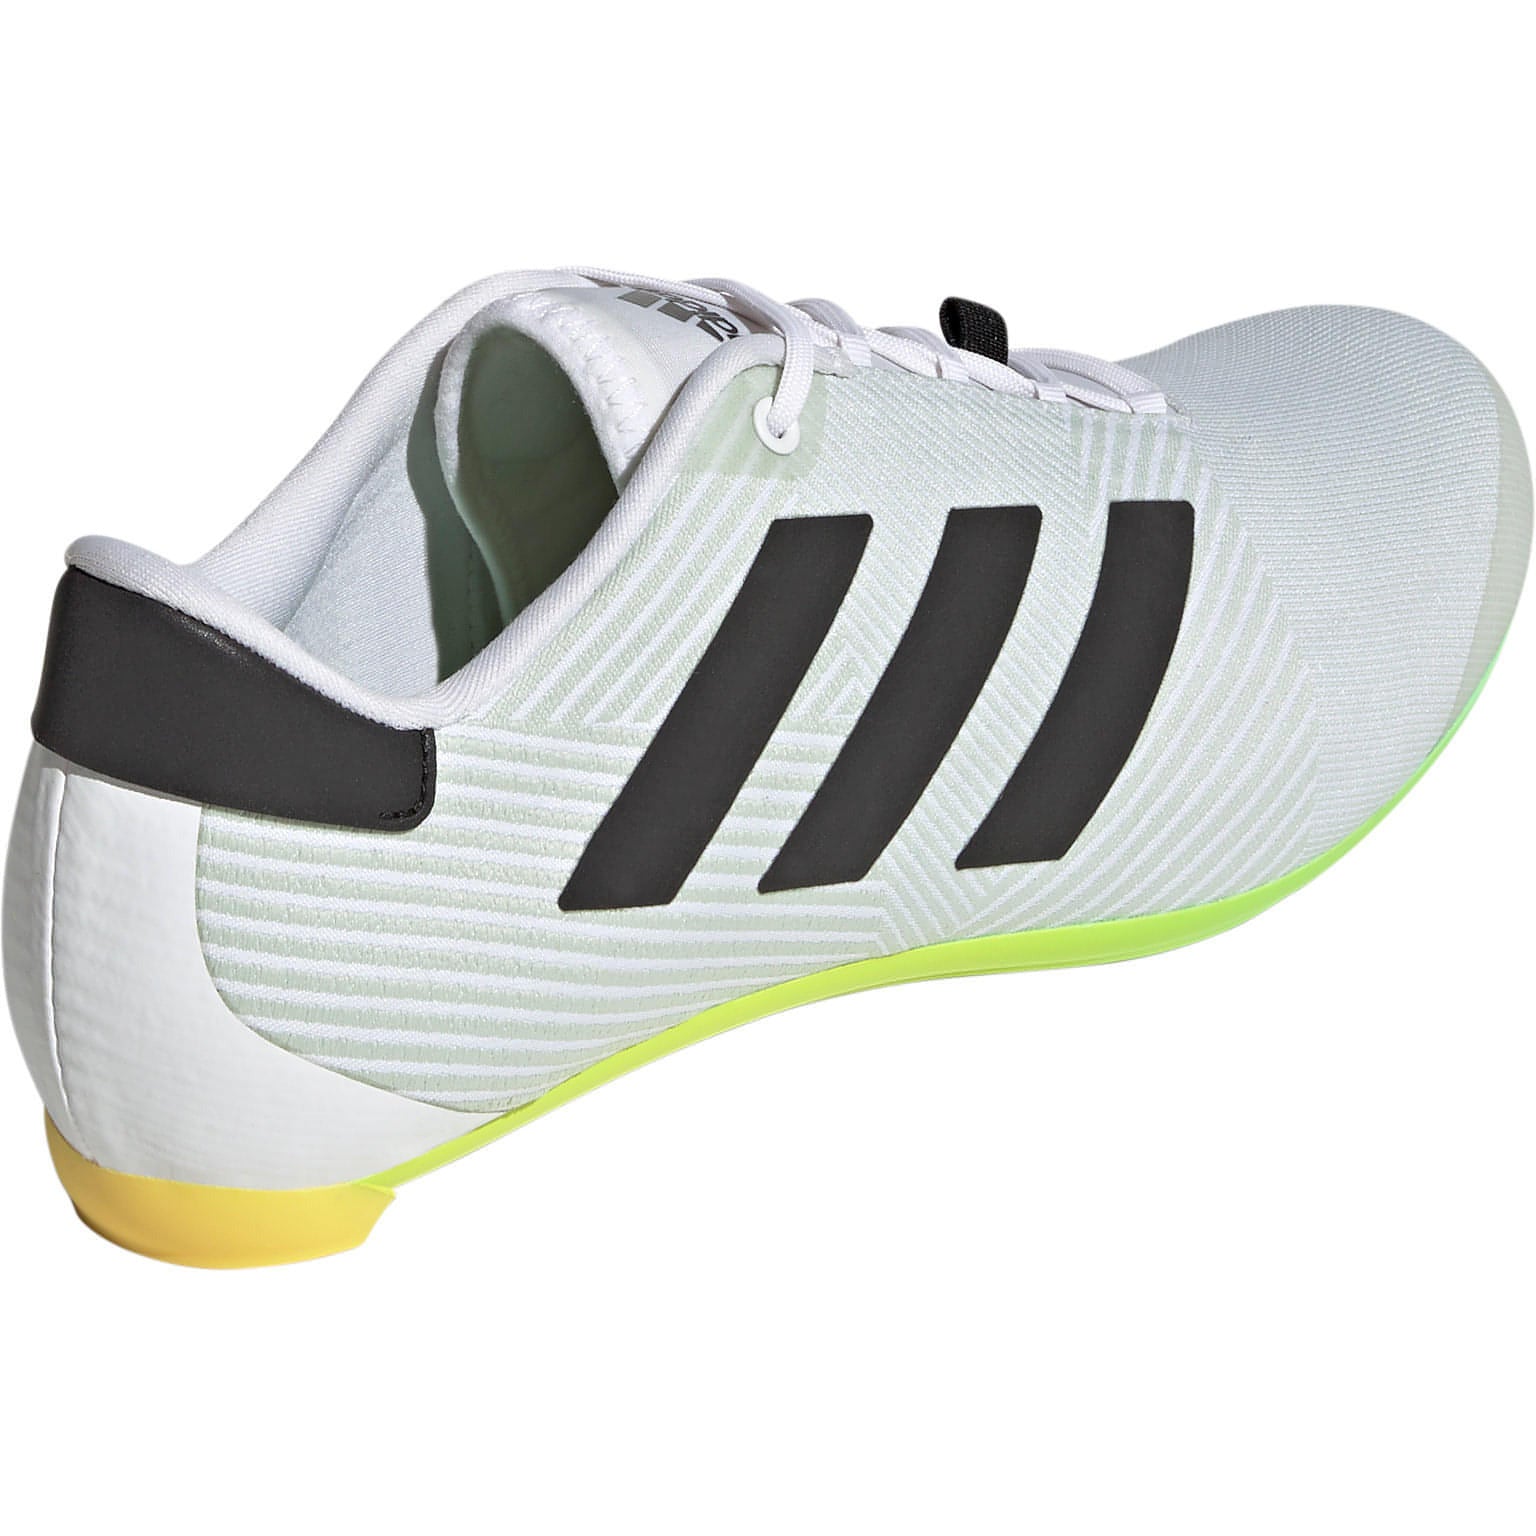 Adidas The Road Cycling Shoes Gx1661 Back View